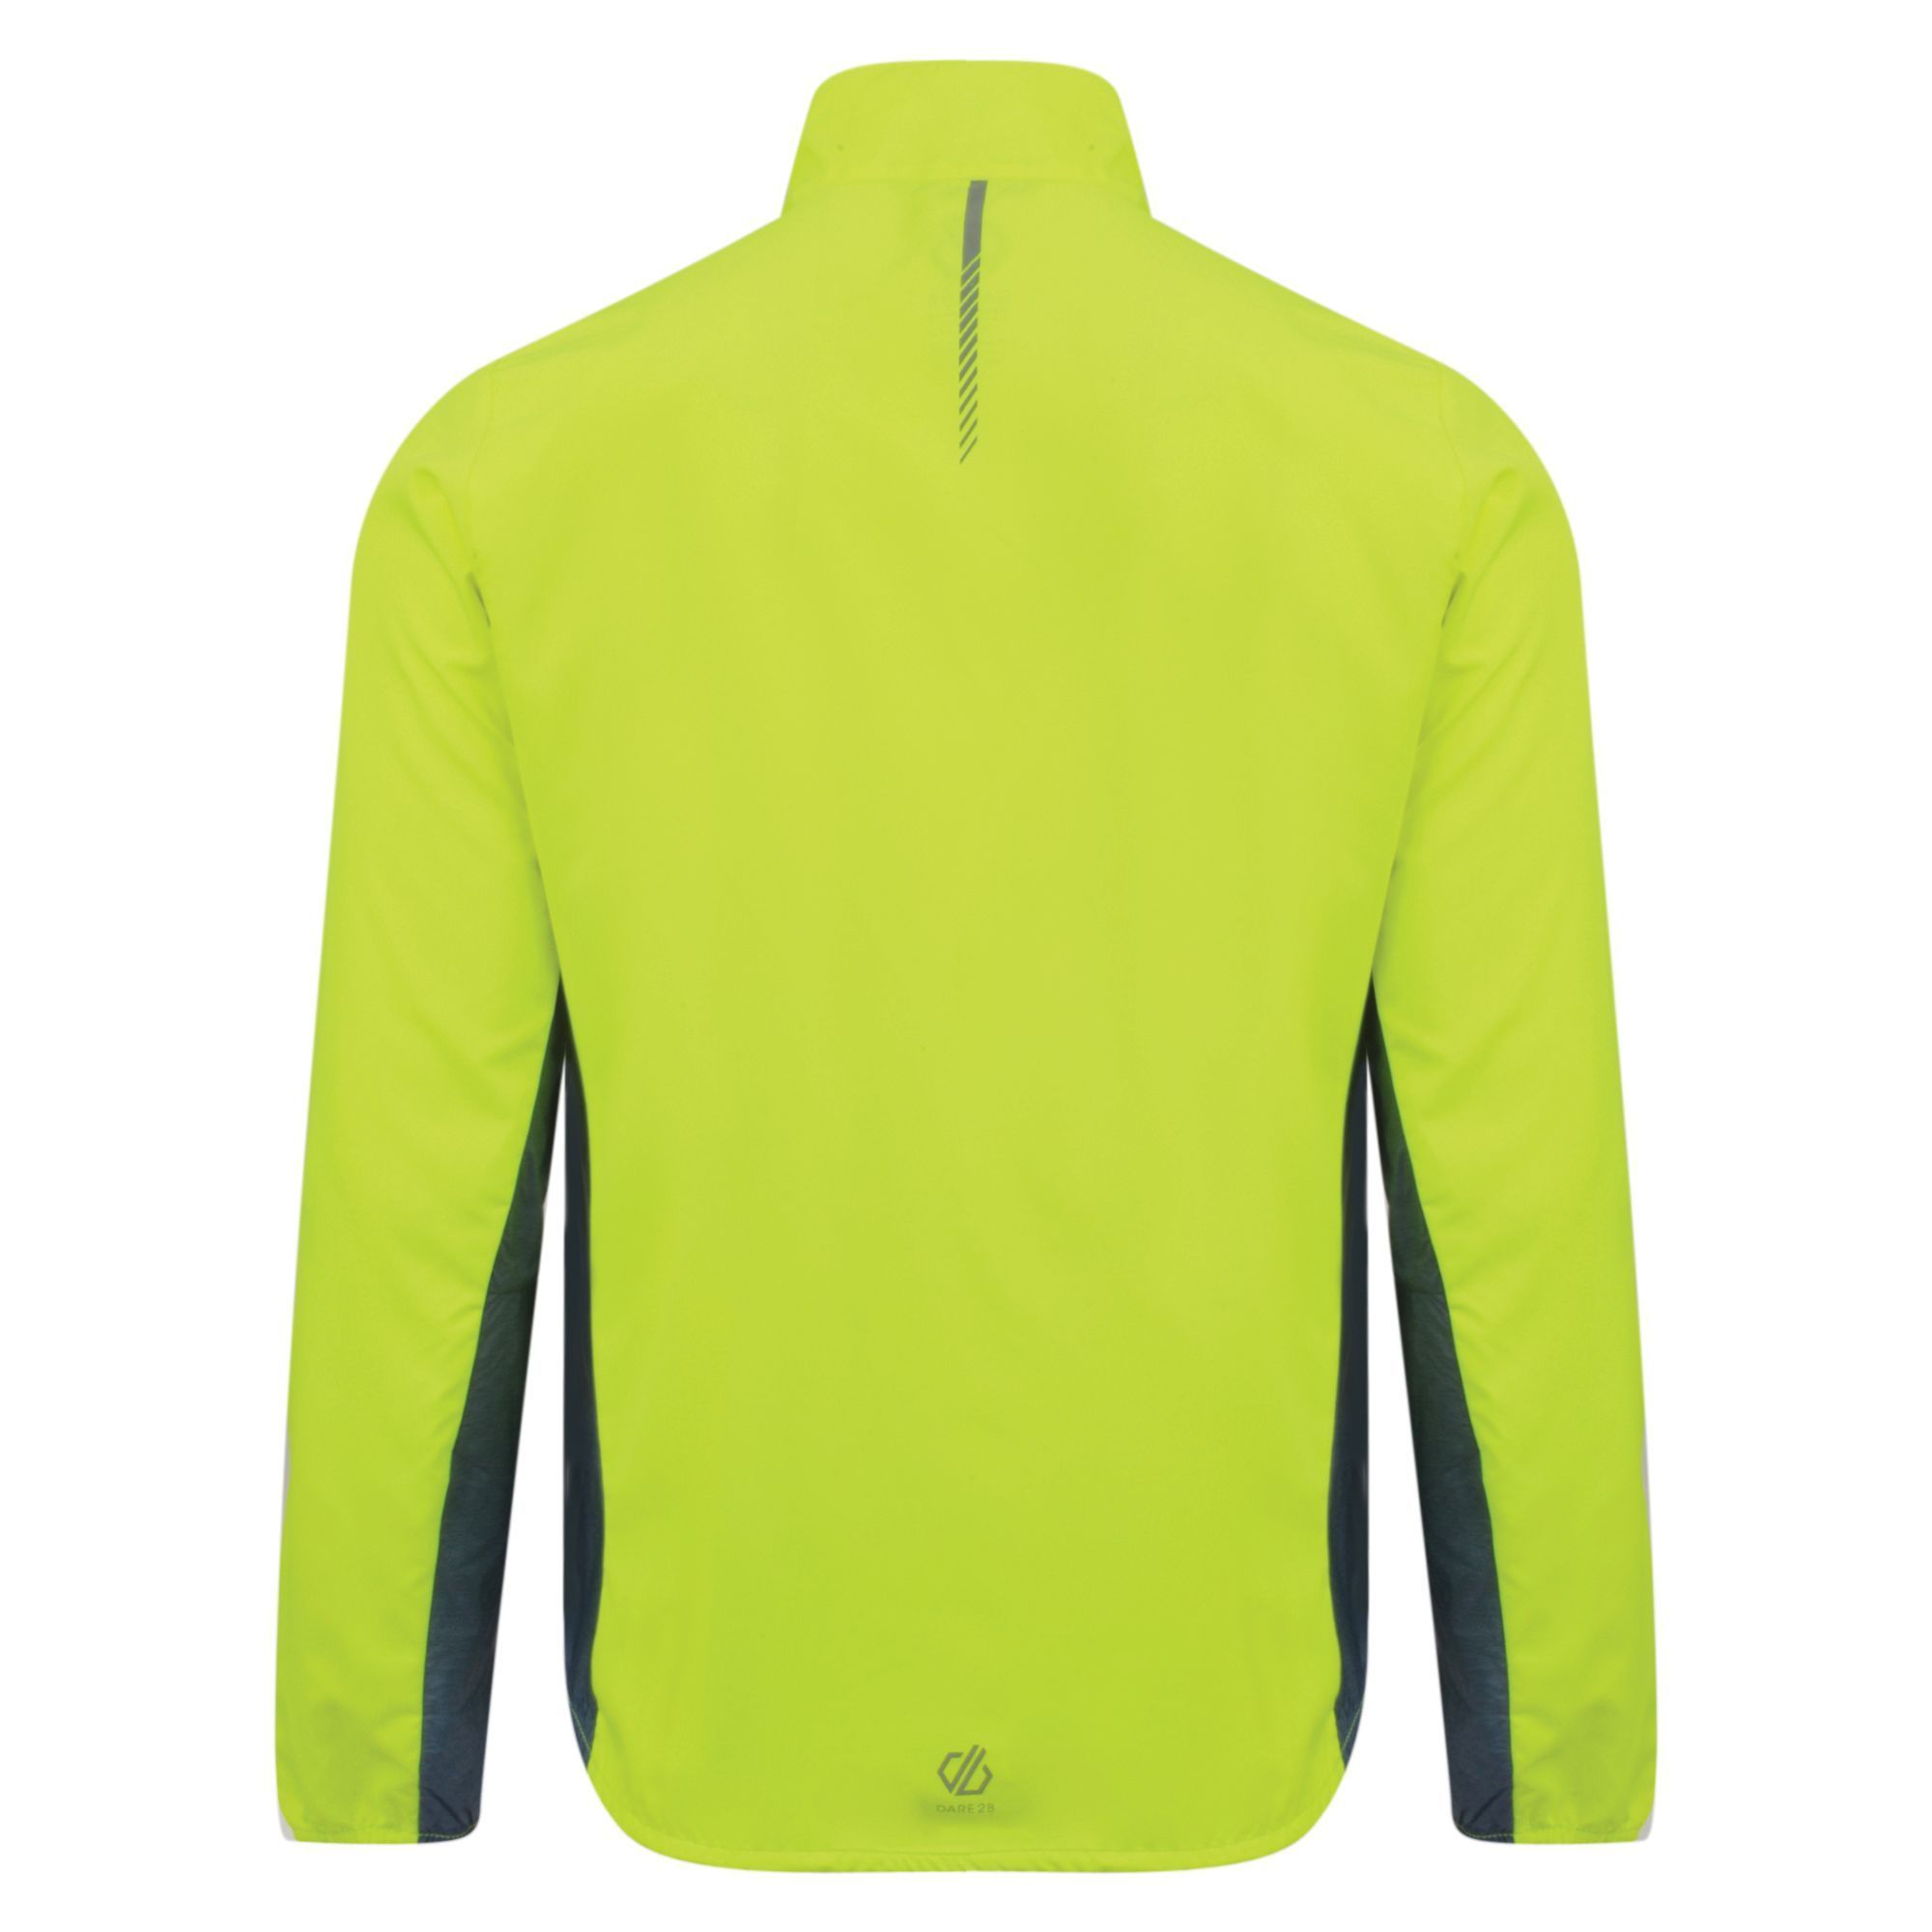 100% Ilus polyester fabric. Wind resistant fabric. Water repellent finish. Elasticated cuffs and hem. Reflective detail for enhanced visibility.